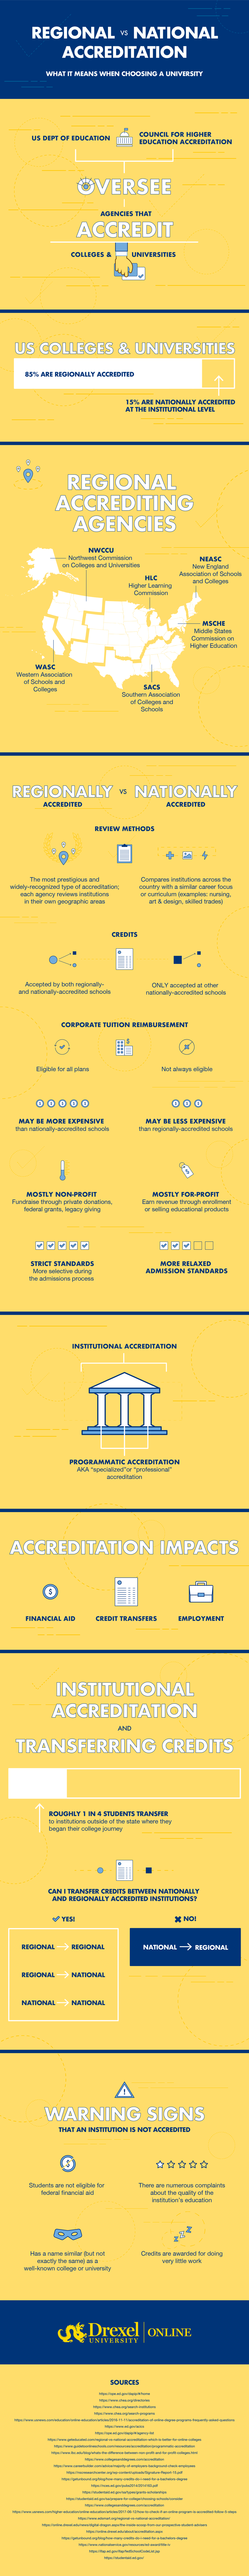 Full infographic on how regional vs national accreditation created by Drexel University Online